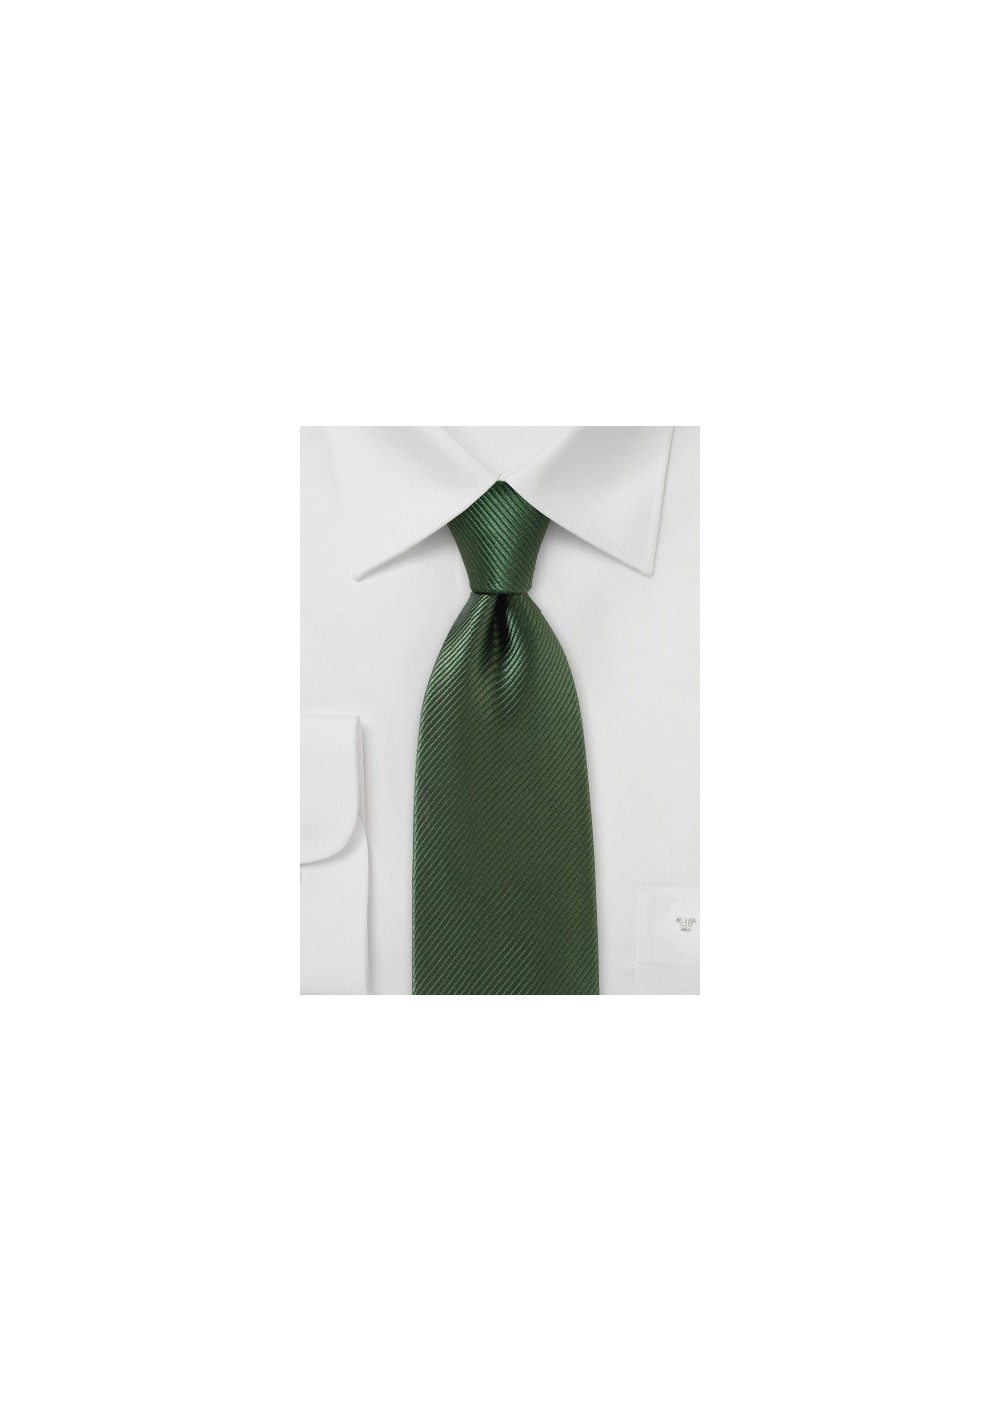 Moss Colored Tie with Elegant Satin Finish